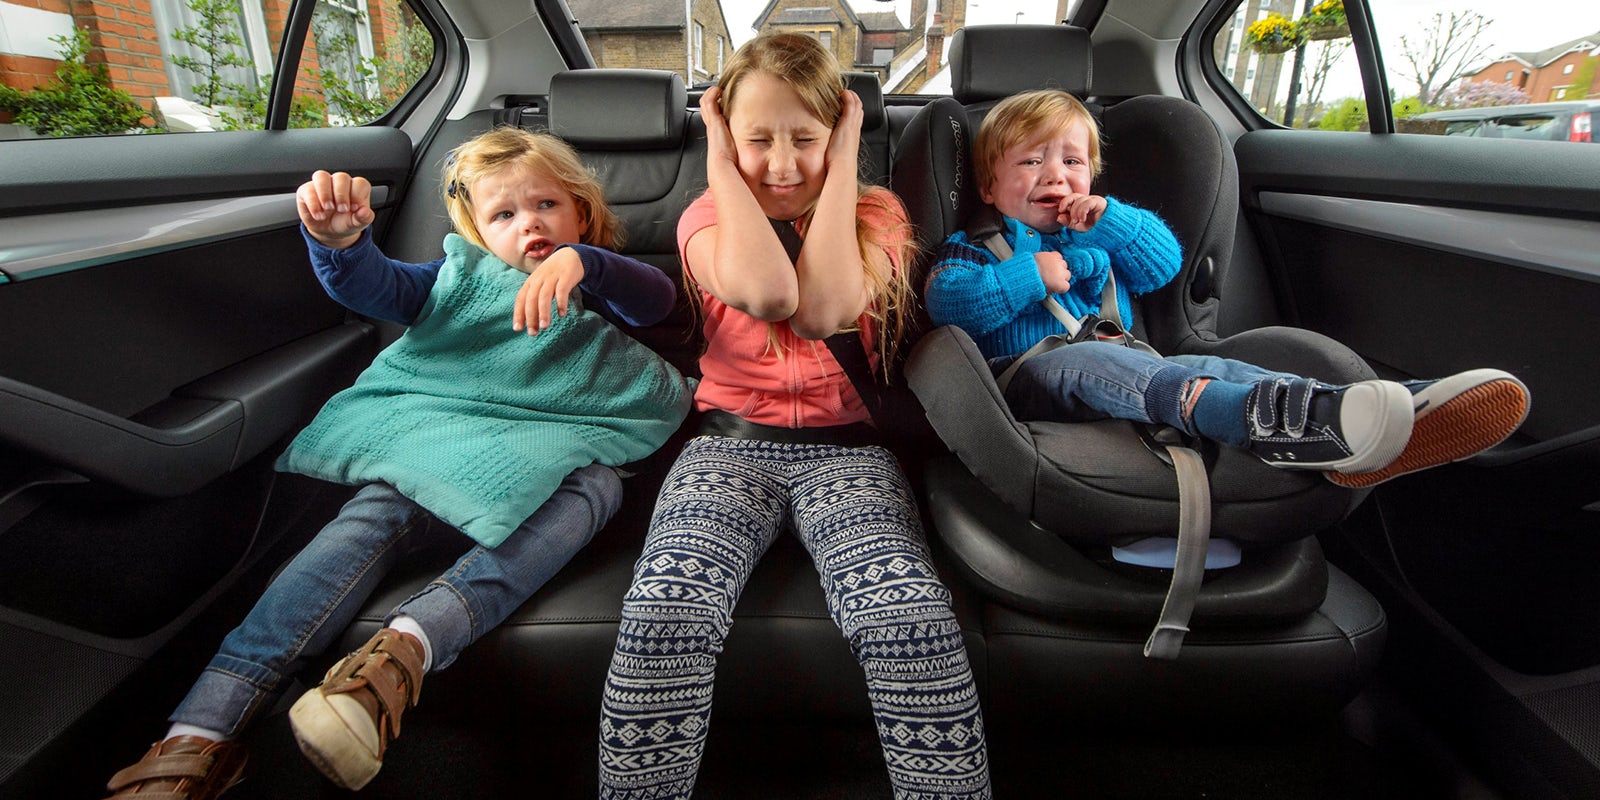 Car seat blanket - Dundee and friends